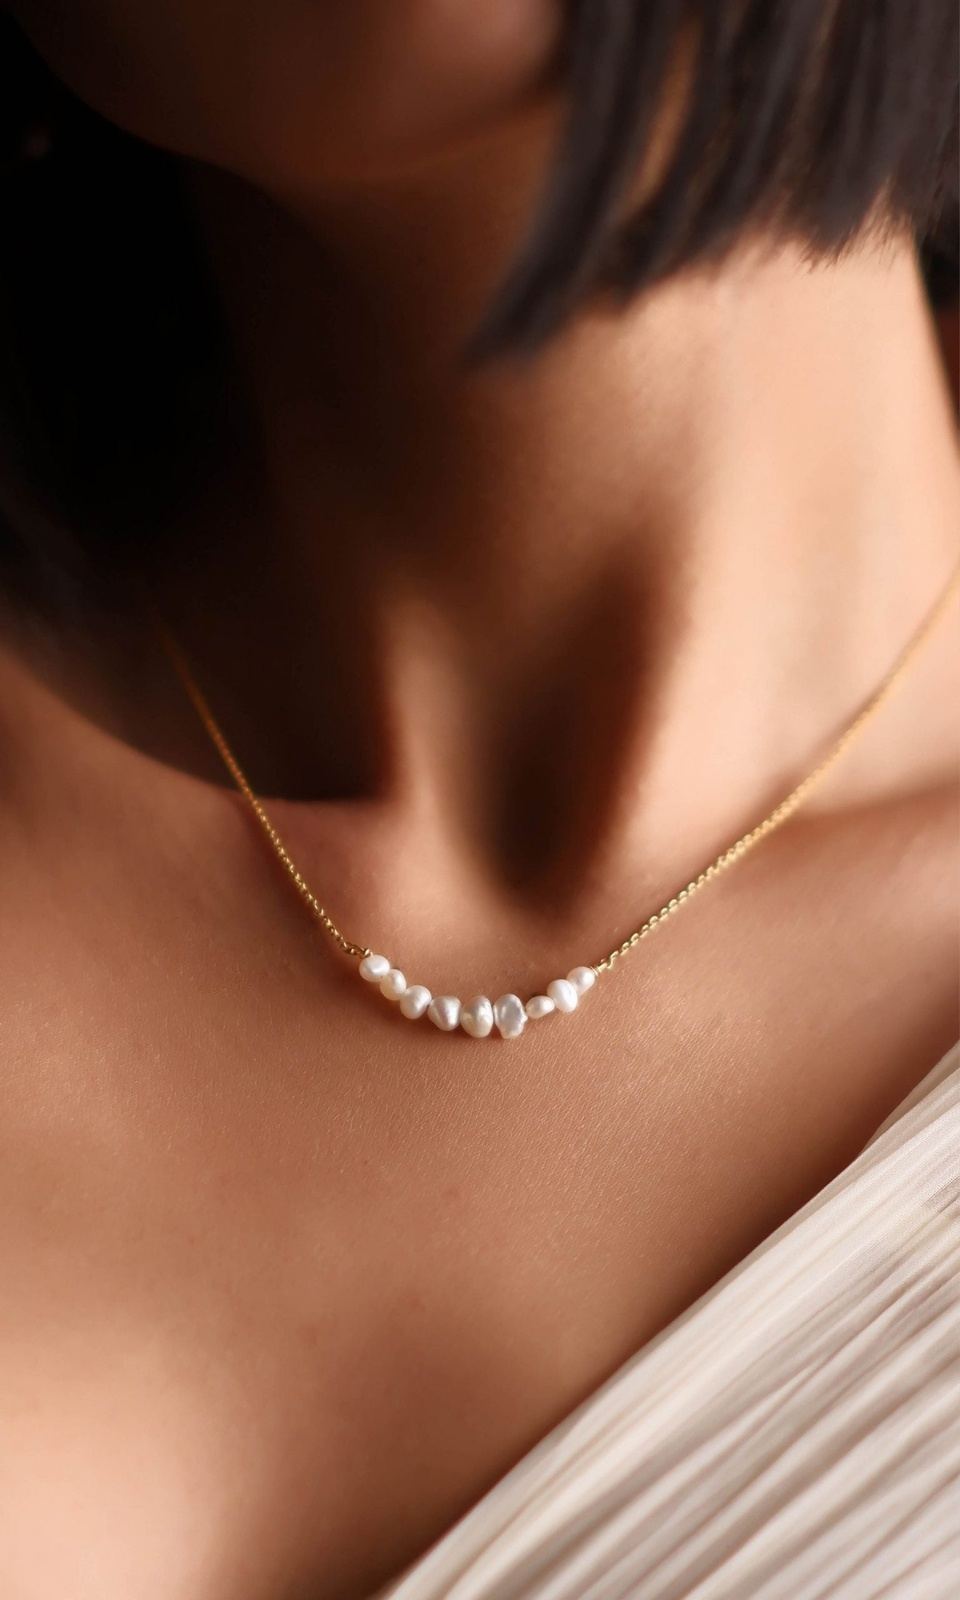 Buy Gold Pearl Necklace, Five Pearl Bar Necklace Gold Filled, Pearl Necklace  for Women, Dainty Pearl Jewelry, Pearl Gift, 14k Gold Filled Chain Online  in India - Etsy